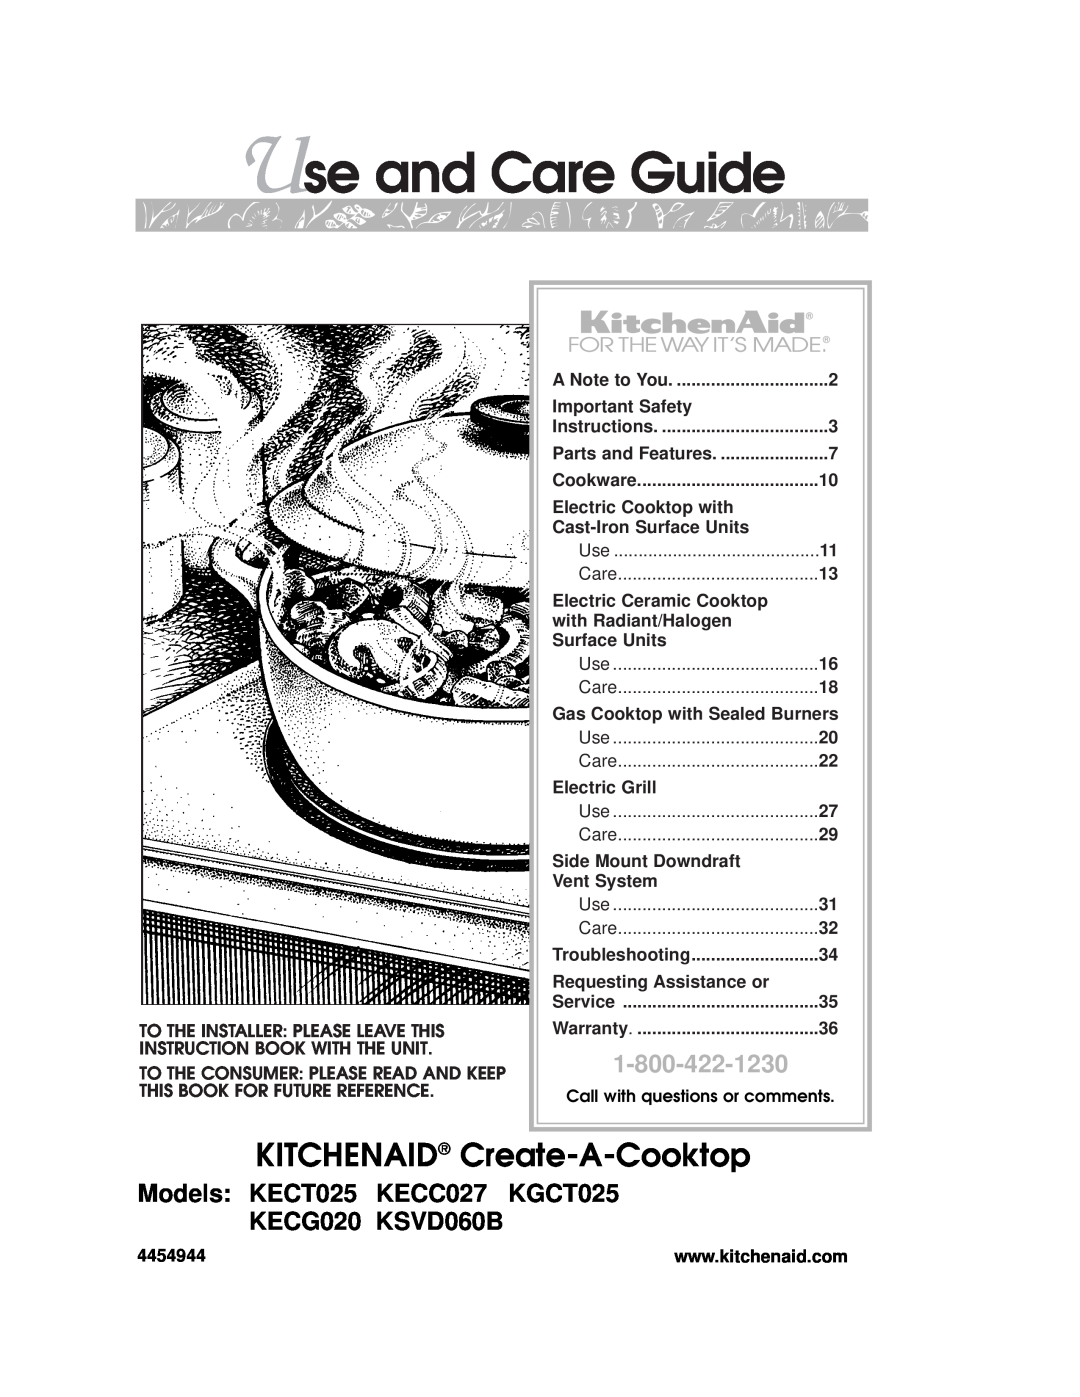 KitchenAid KKECT025, KSVD060B, KECG020 important safety instructions Use and Care Guide, KITCHENAID Create-A-Cooktop 